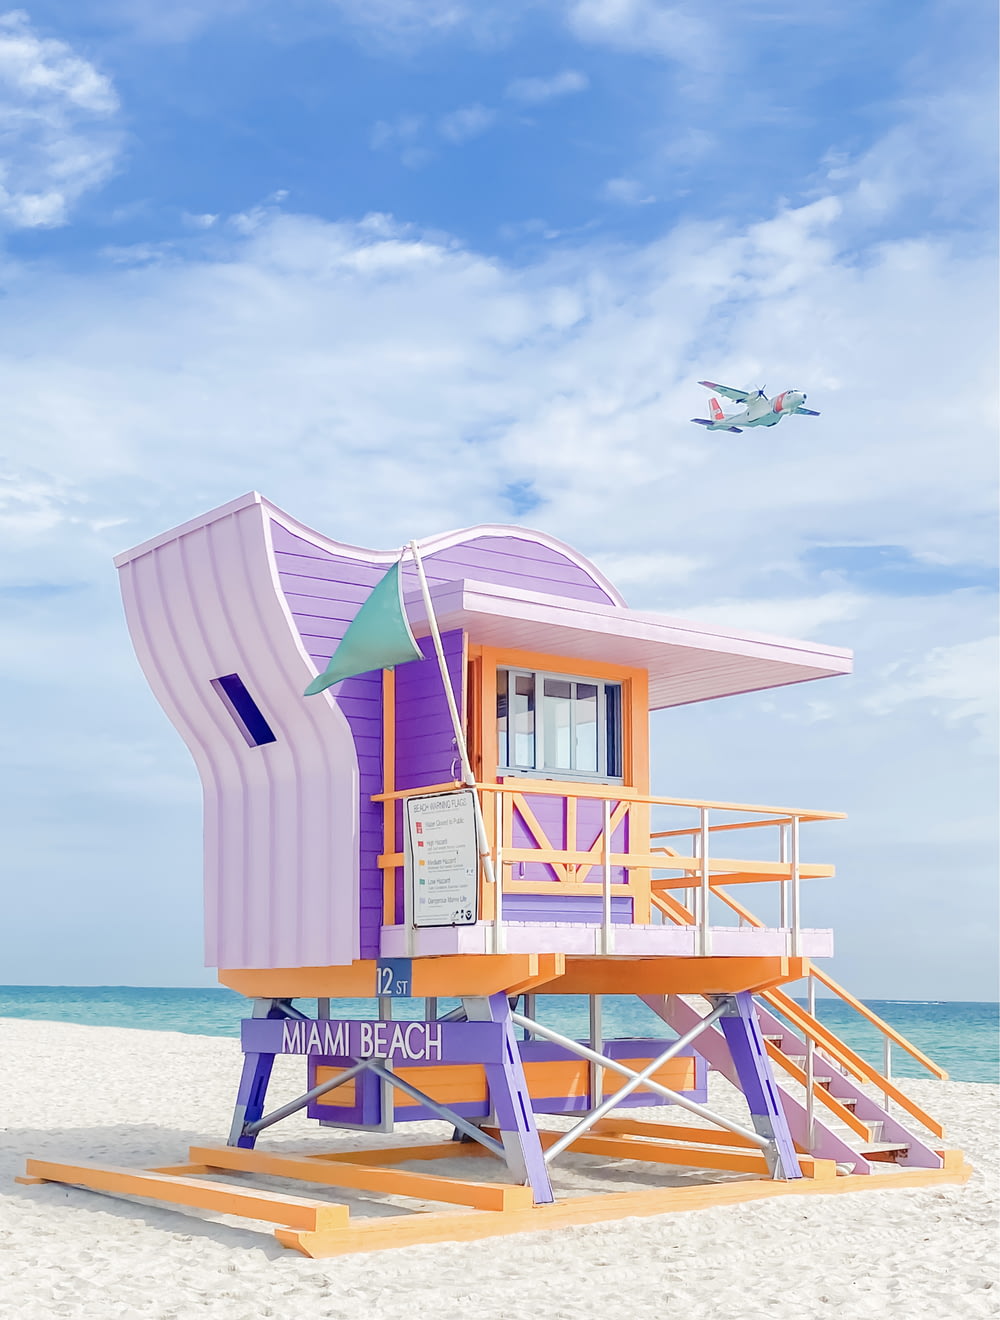 a lifeguard stand on the beach with a plane in the background